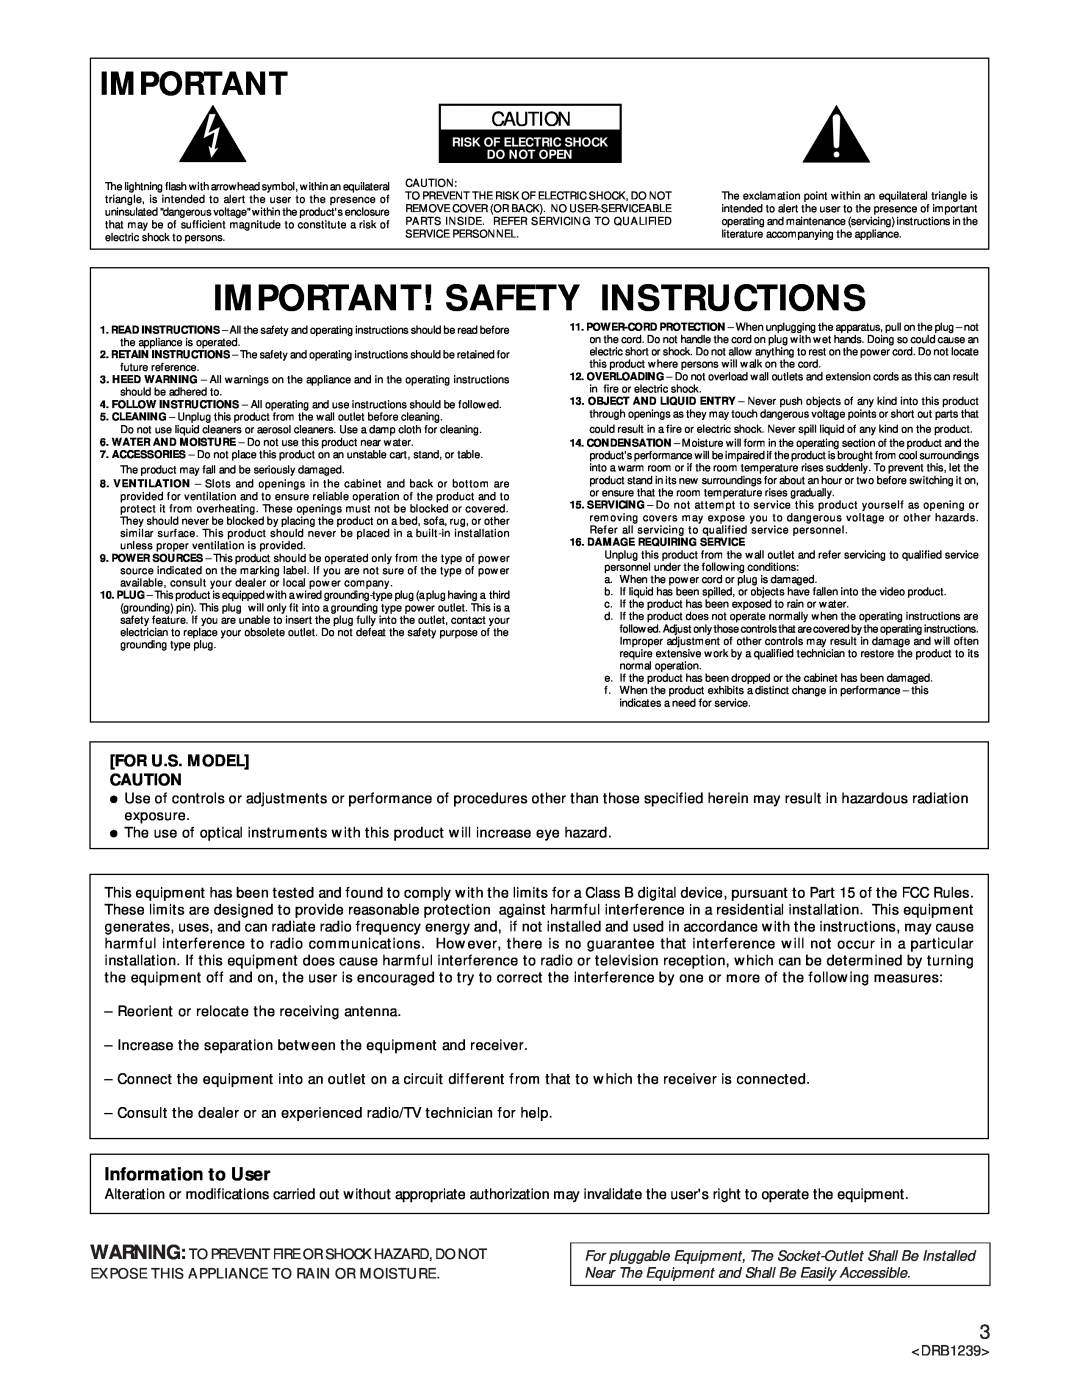 Pioneer DRM-6NX manual Important! Safety Instructions, Information to User, For U.S. Model Caution 